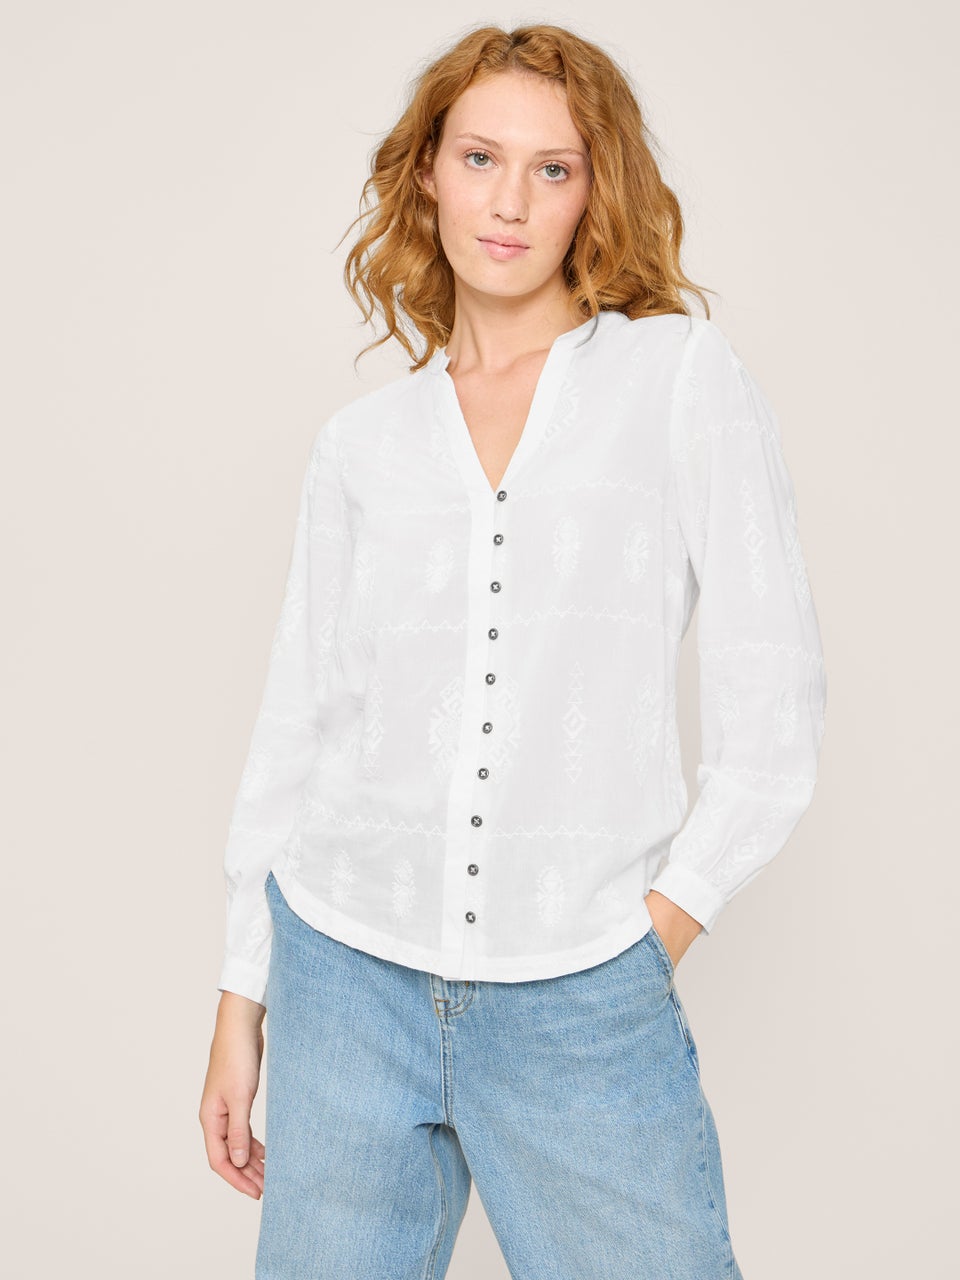 Kate Bestickte Bluse